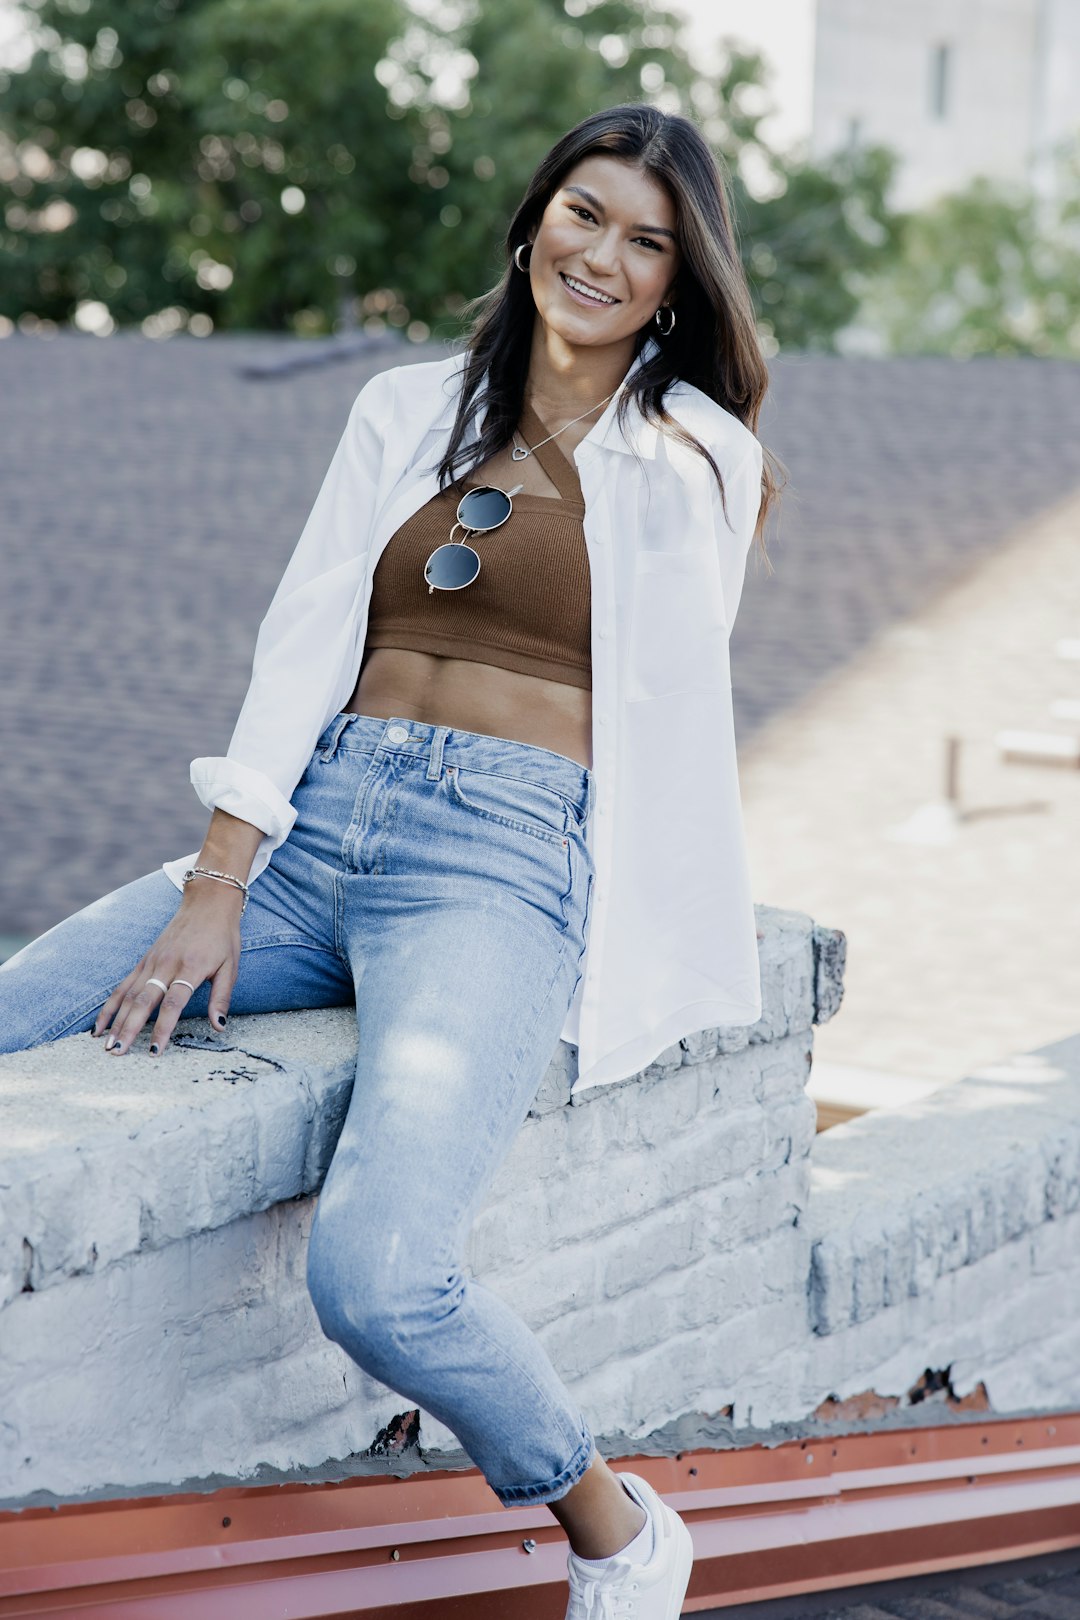 woman in white long sleeve shirt and blue denim jeans sitting on gray concrete bench during